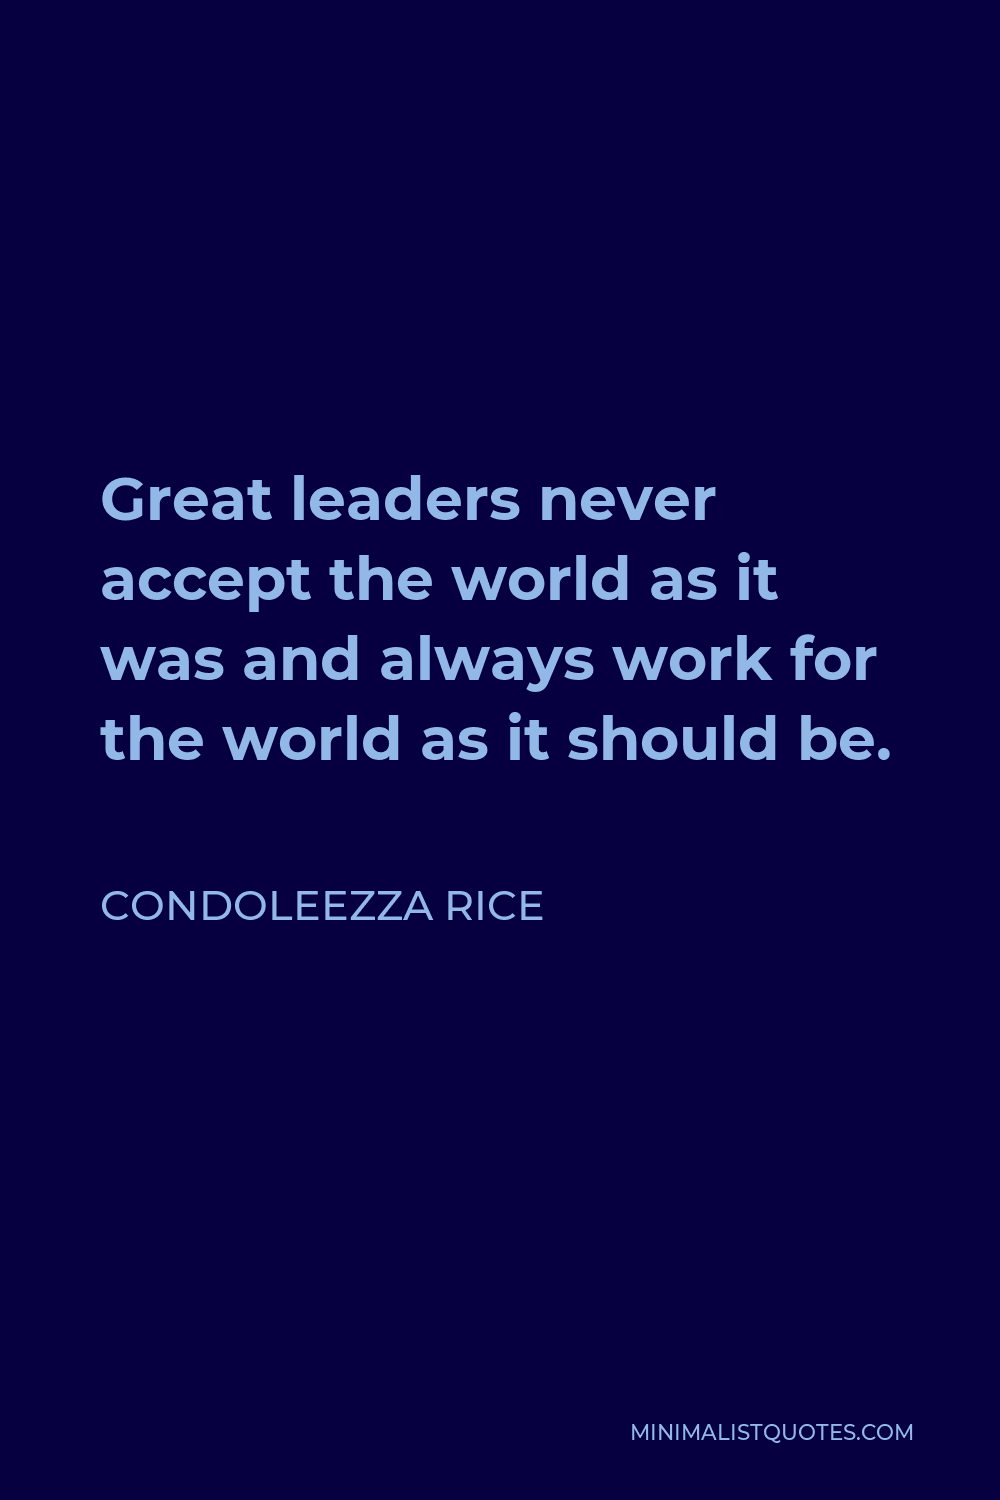 Condoleezza Rice Quote - Great leaders never accept the world as it was and always work for the world as it should be.